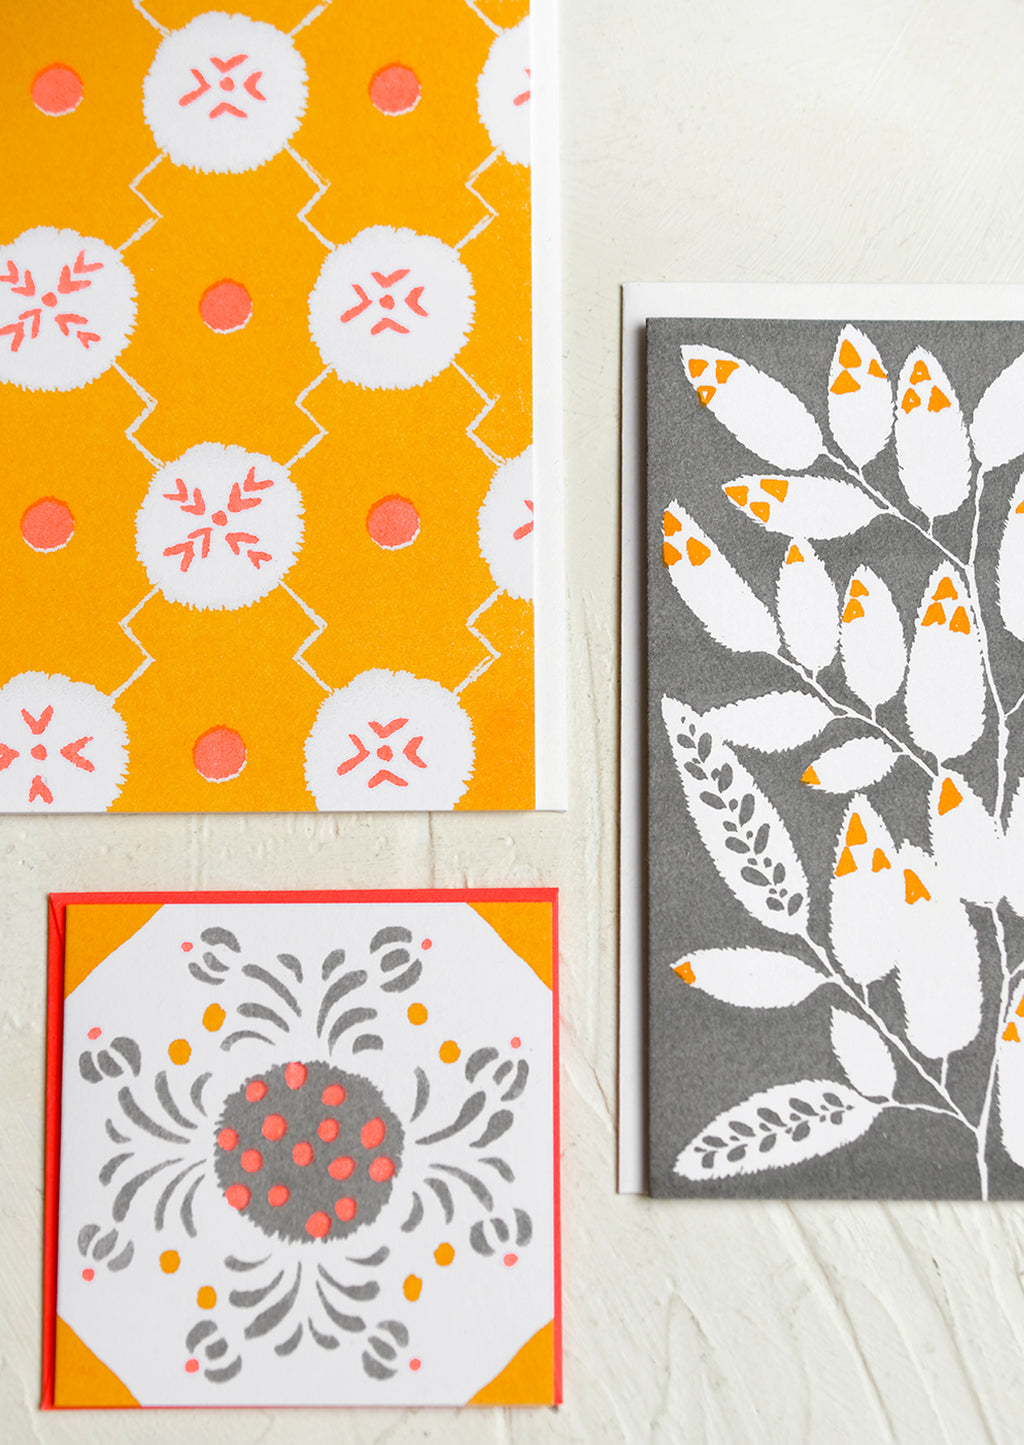 2: A patterned risograph printed card set in grey, coral and orange.